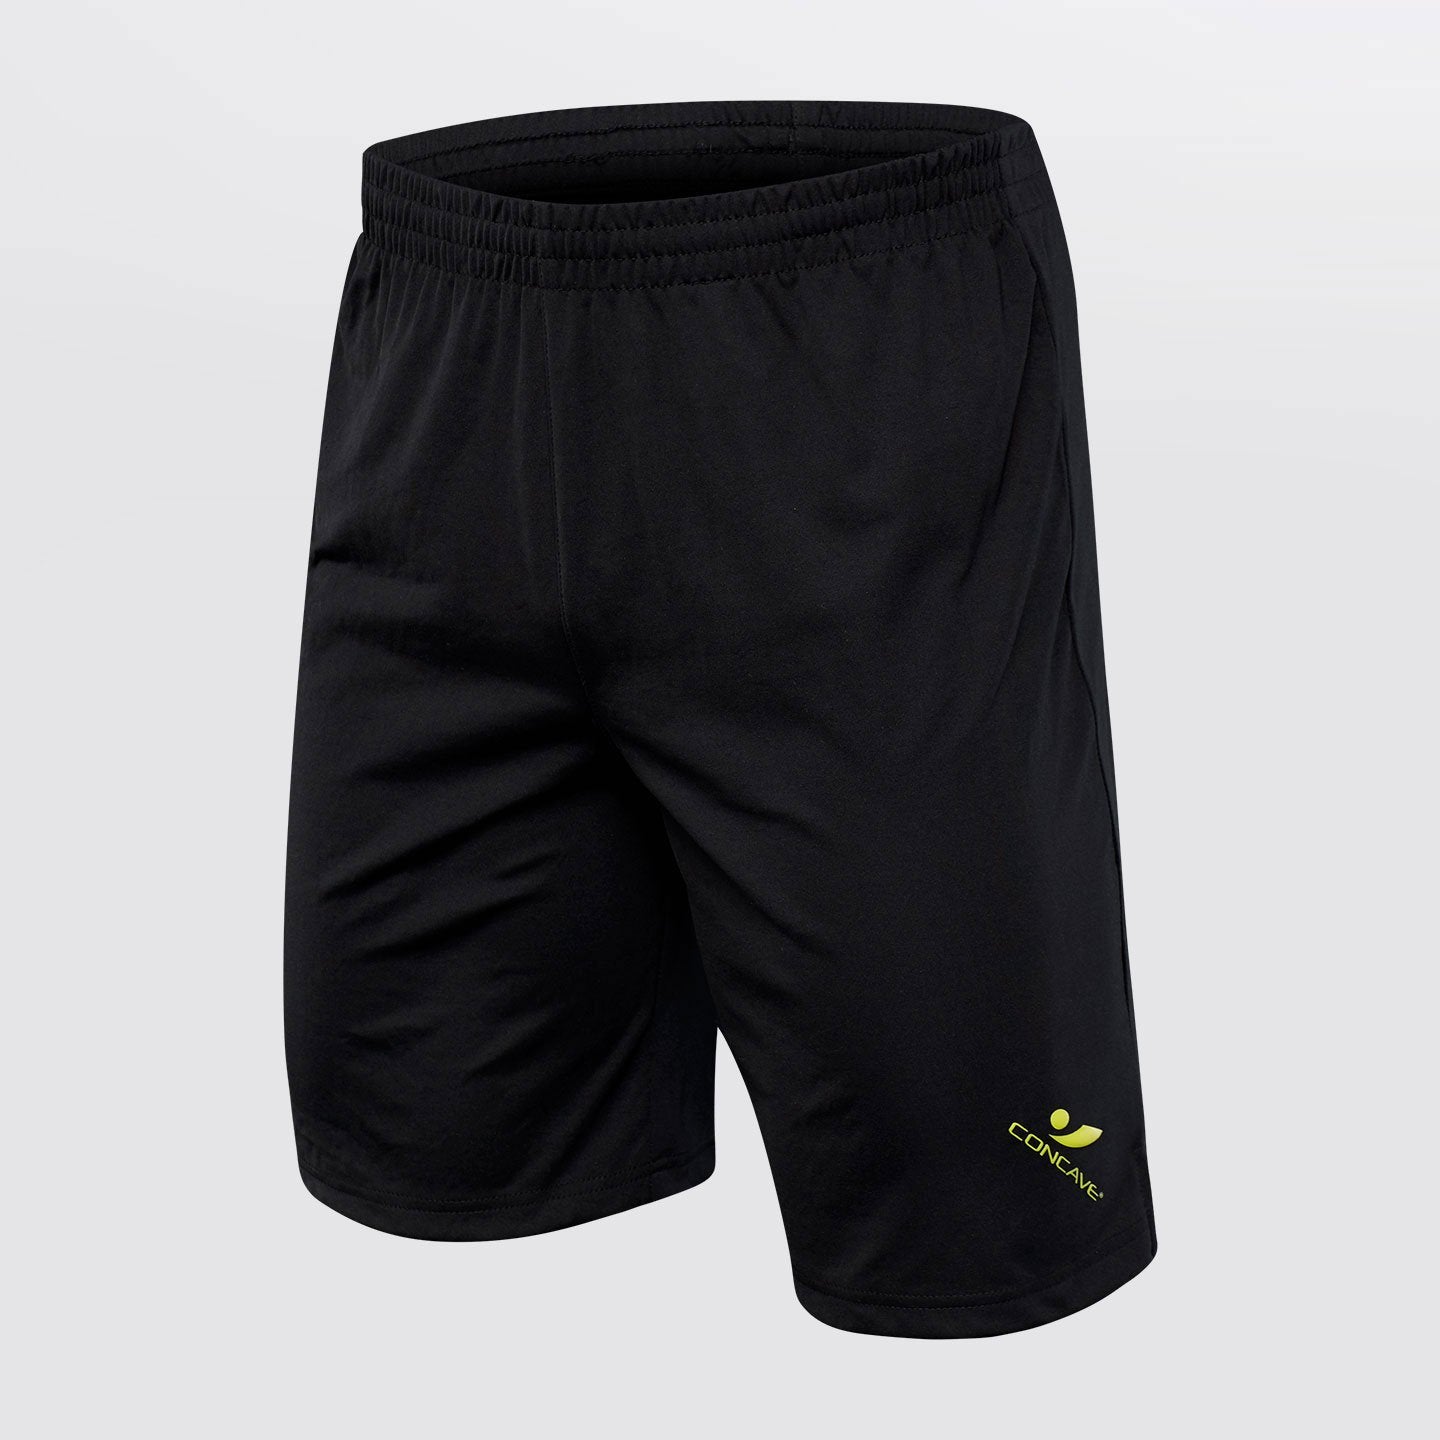 Concave Performance Shorts - Black/Neon Yellow